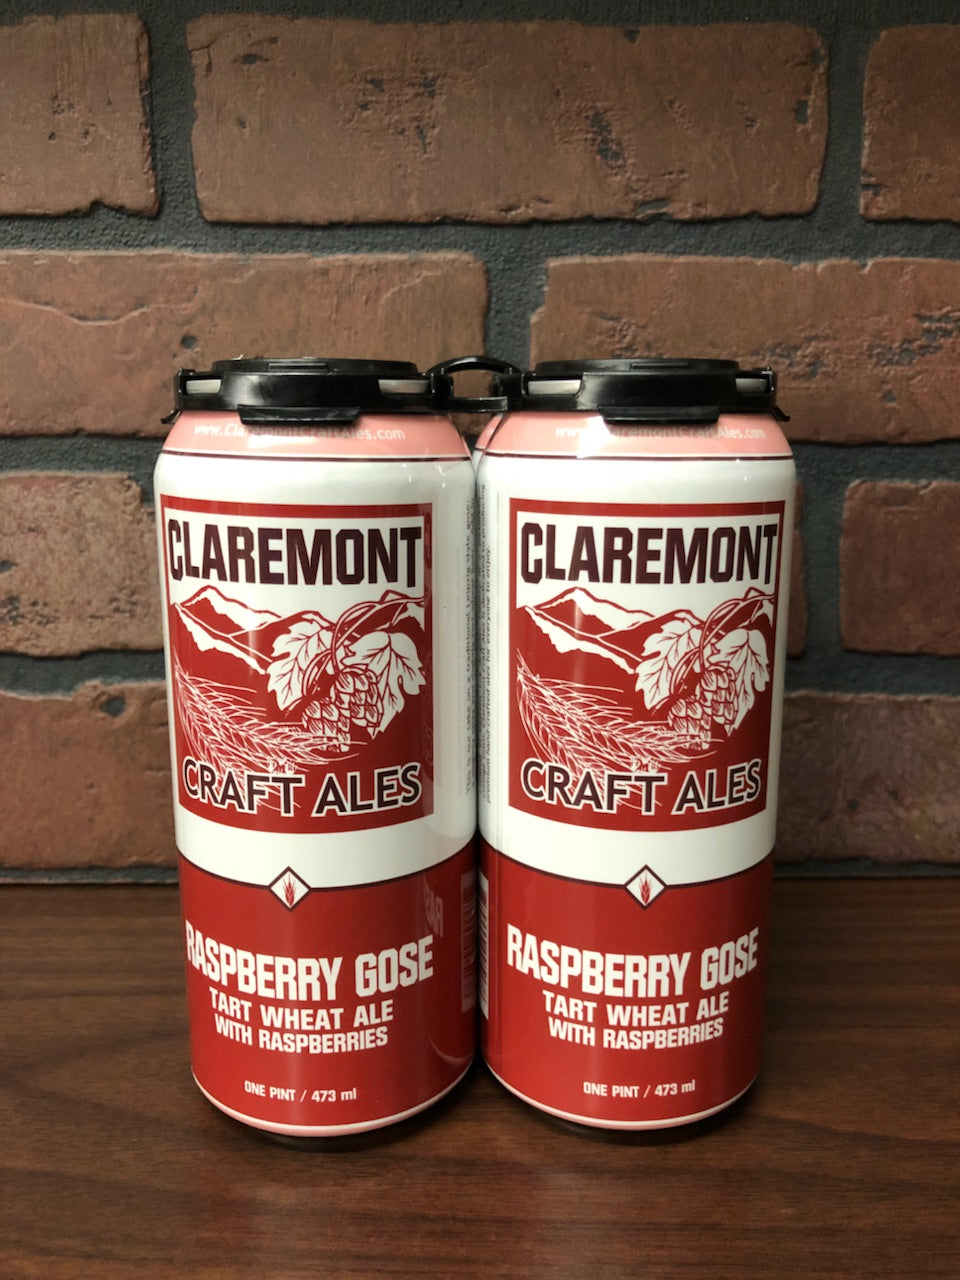 Claremont Craft Ales Raspberry Gose 4 pack cans - Claremont Craft Ales